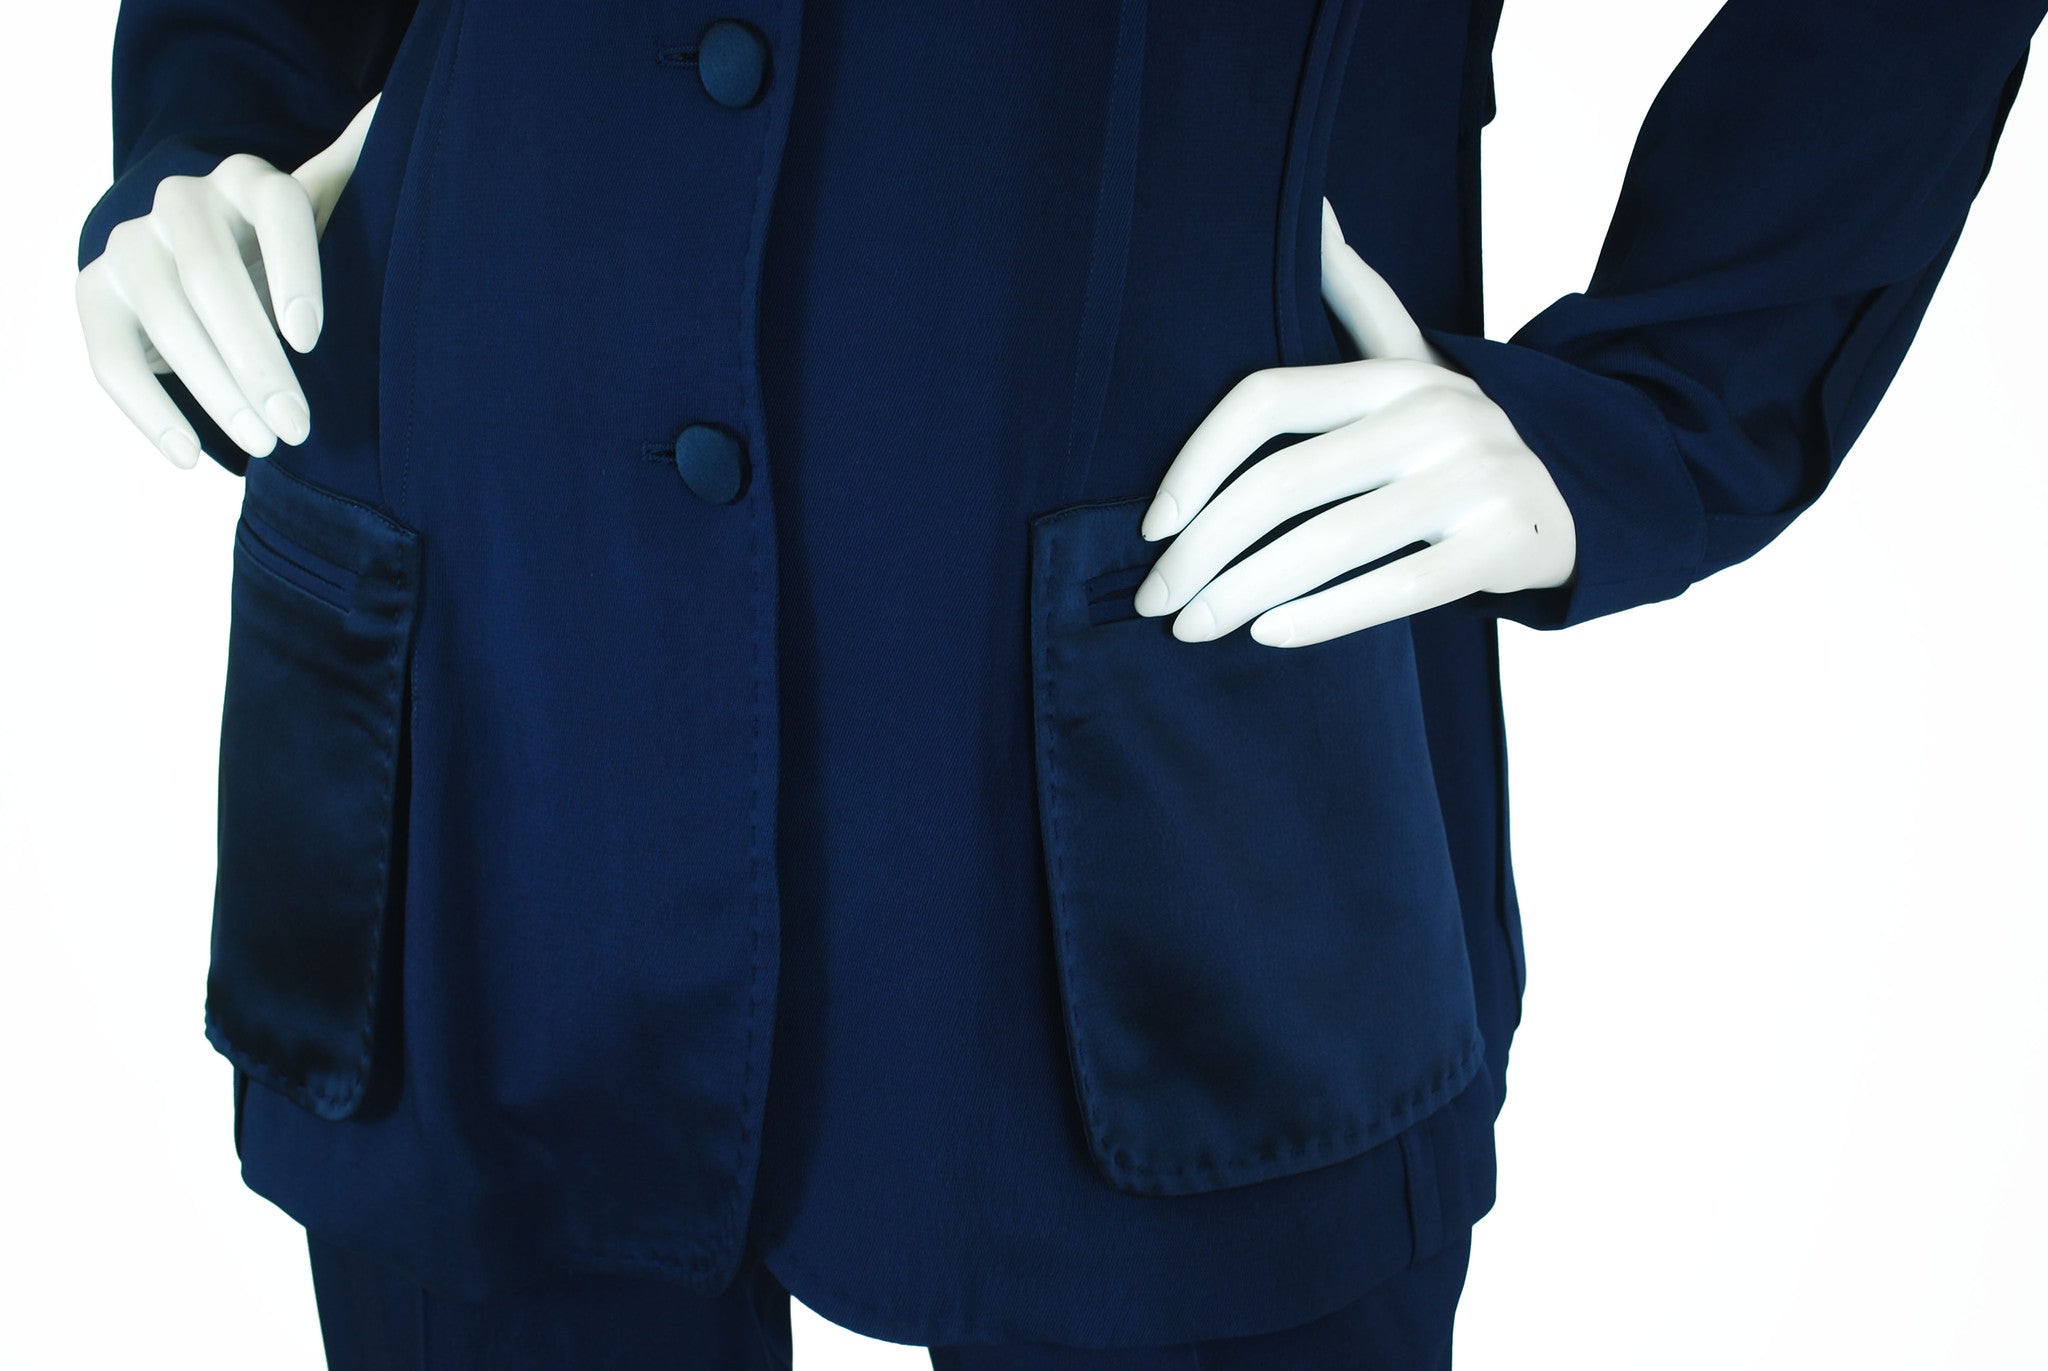 Cheap and Chic Deconstructed Navy Trouser Pant Suit